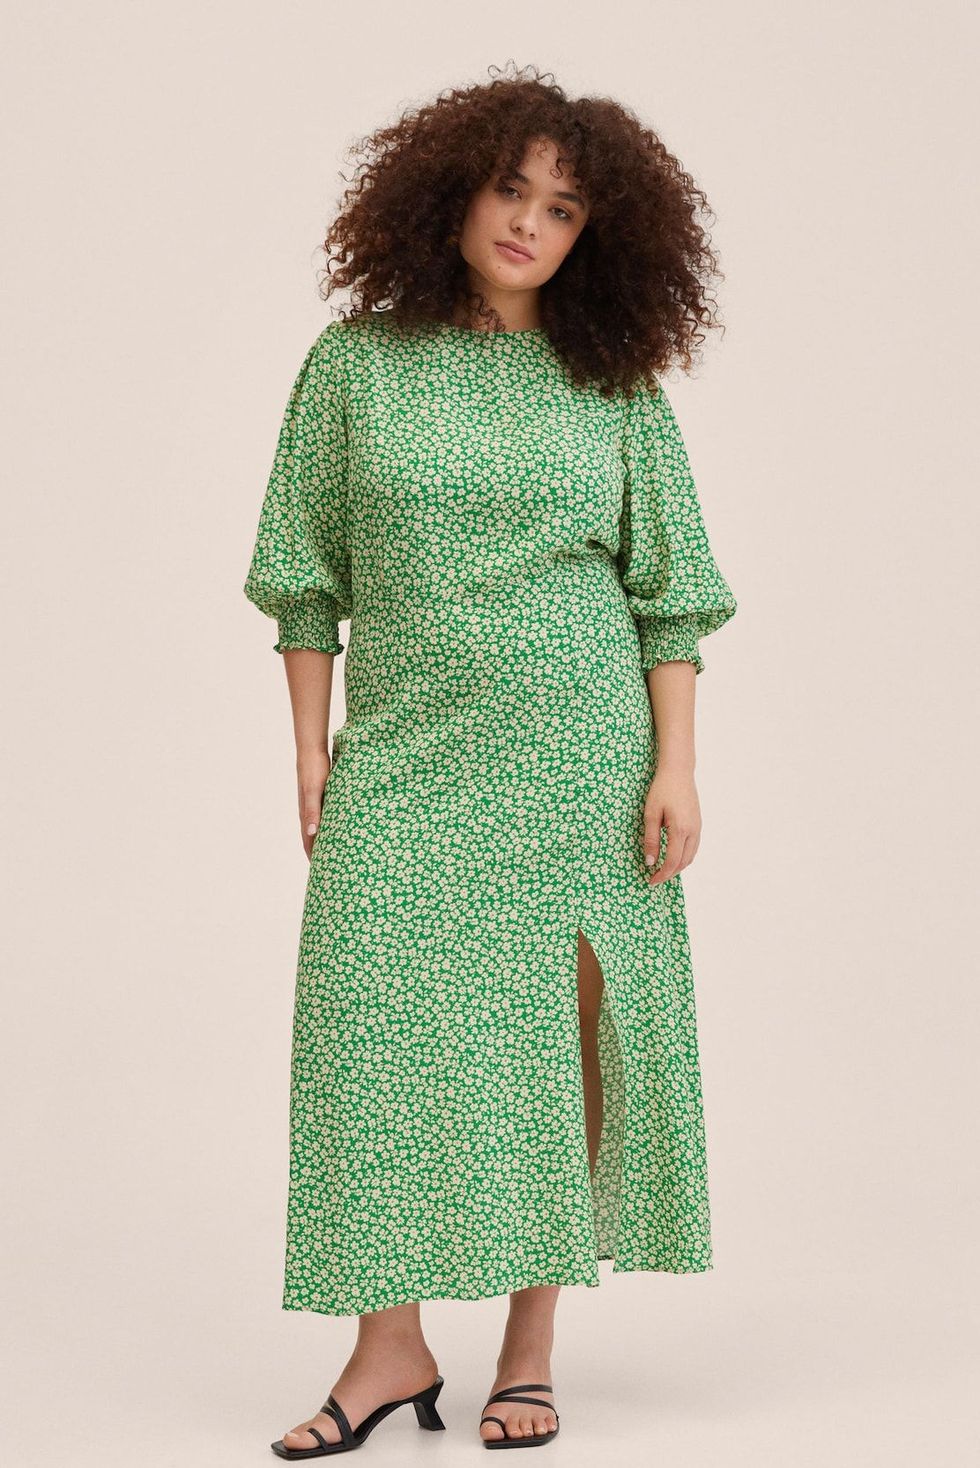 29 midi dress styles to buy before summer 2022